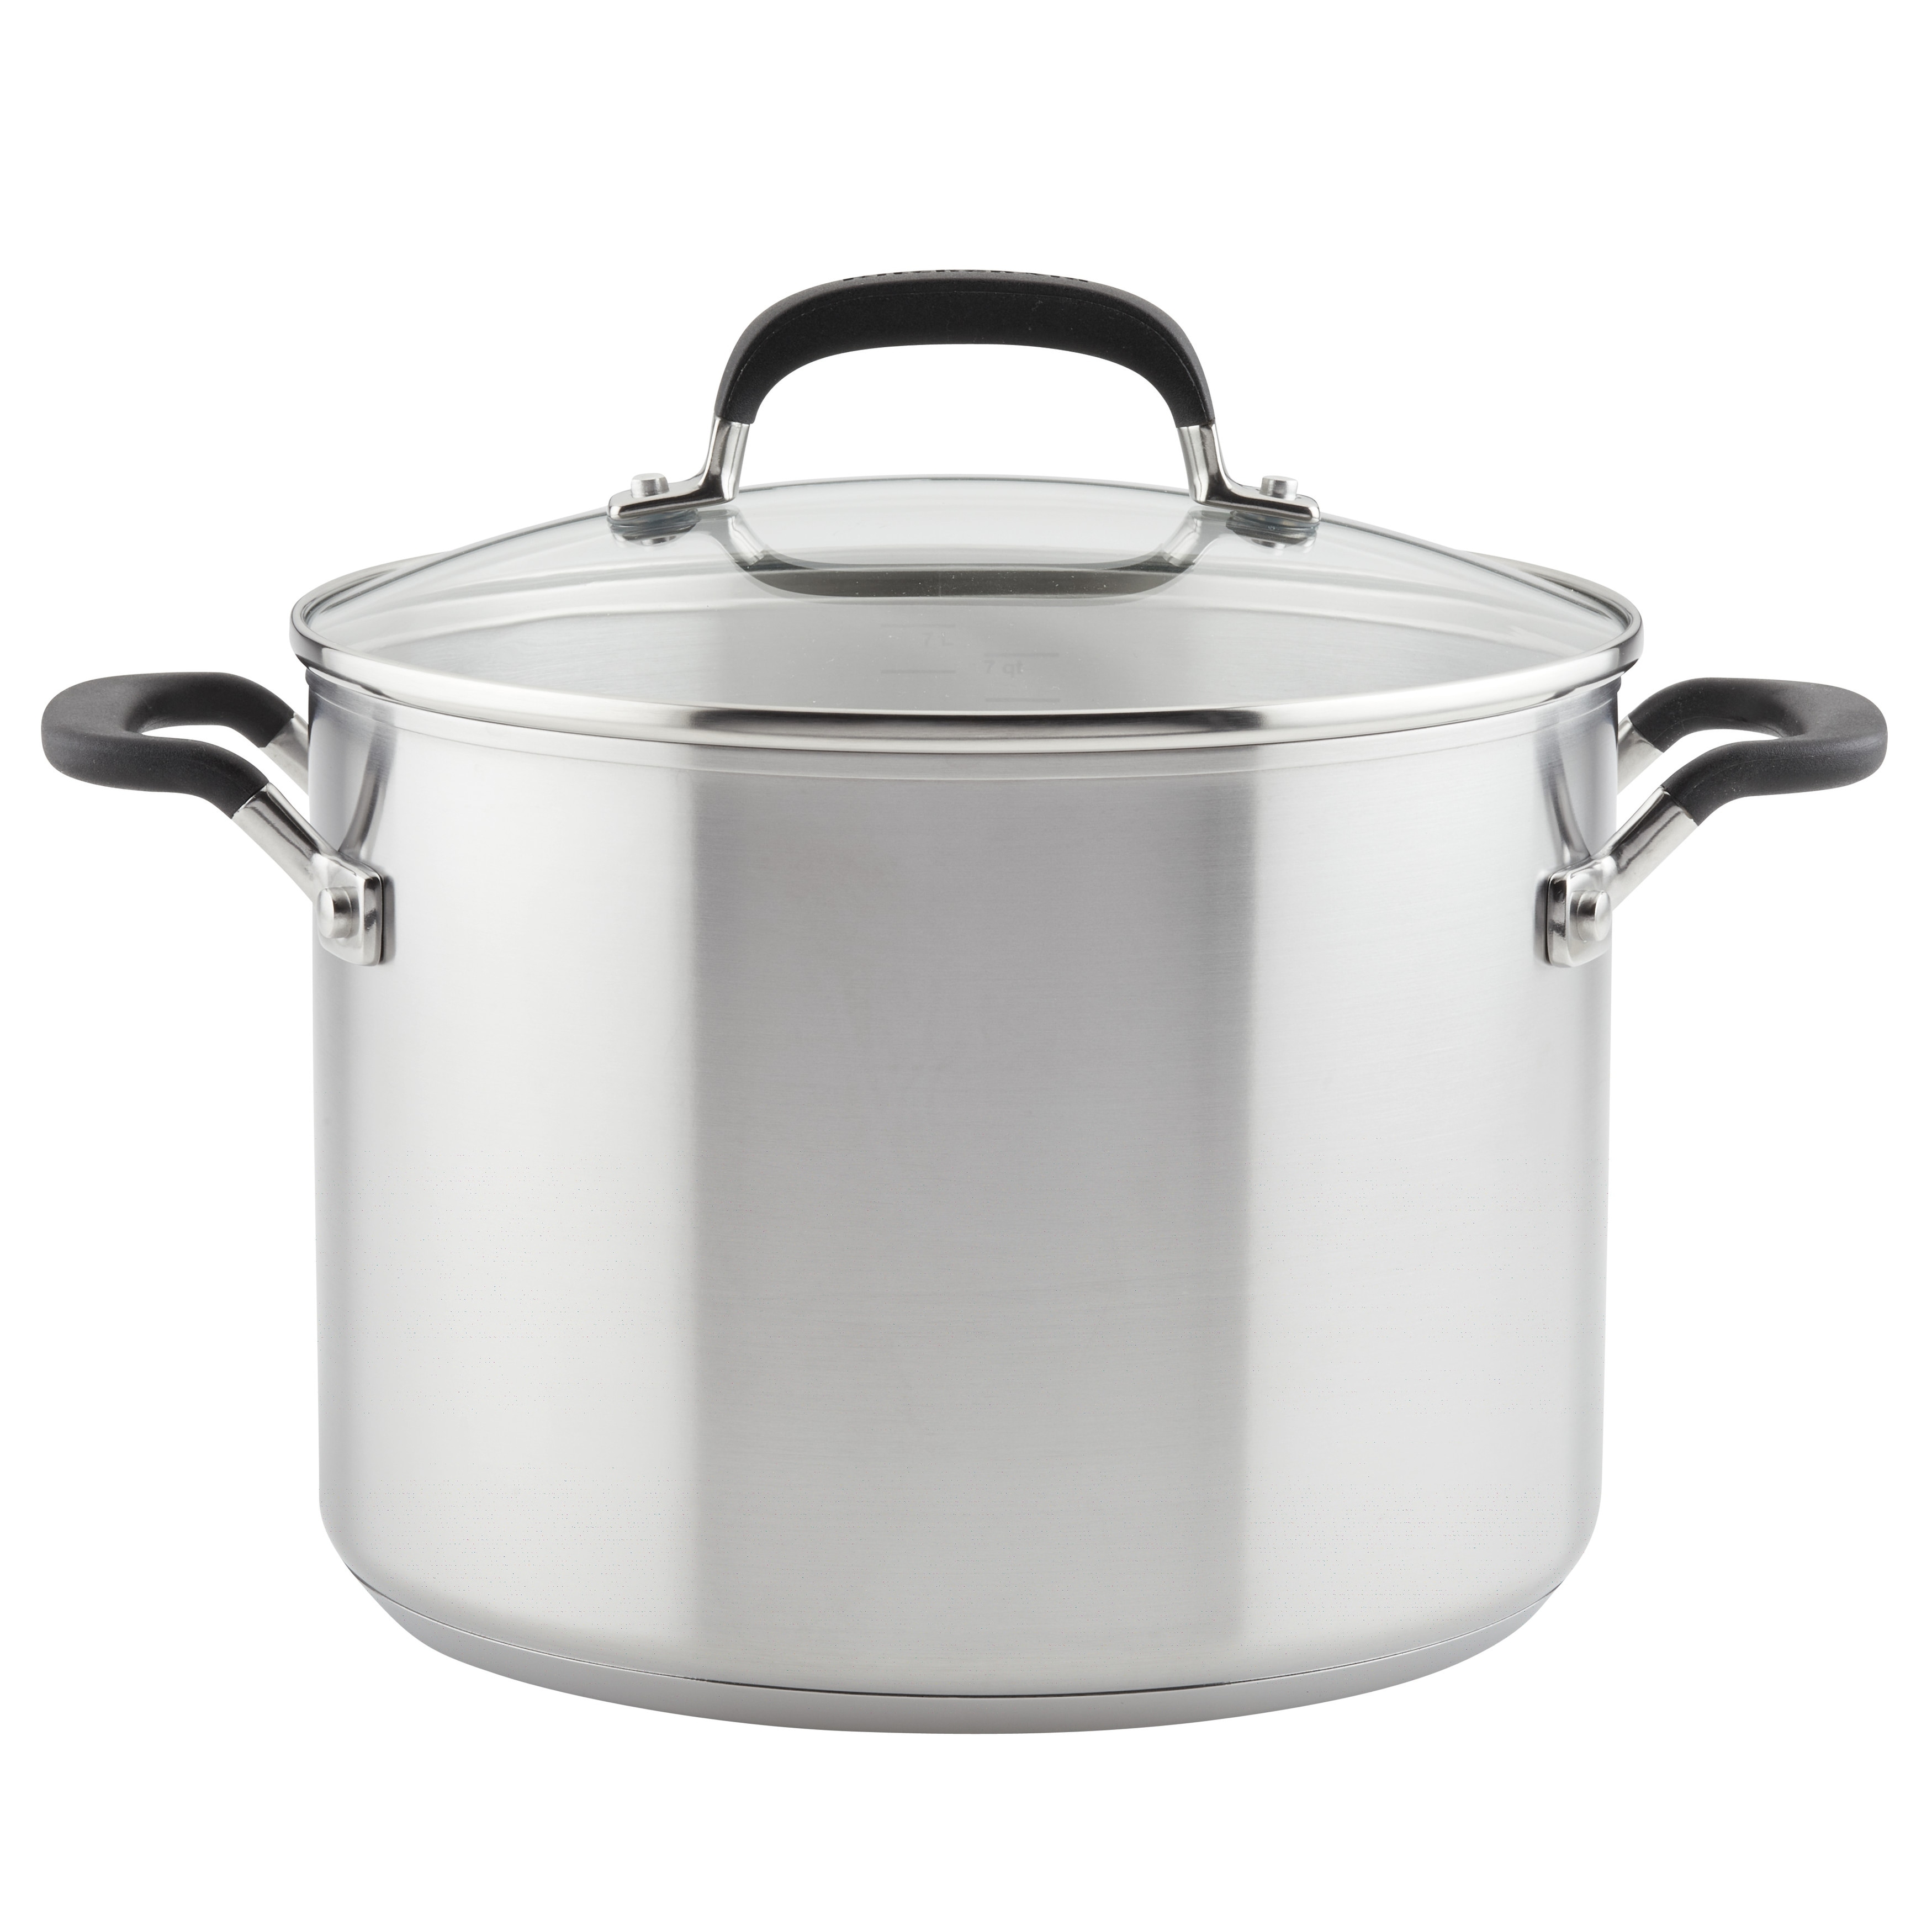 https://ak1.ostkcdn.com/images/products/is/images/direct/cb62a1fdac52485f34e2fe9b1619719431e1ce73/KitchenAid-Stainless-Steel-Stockpot-with-Measuring-Marks-and-Lid%2C-8qt.jpg